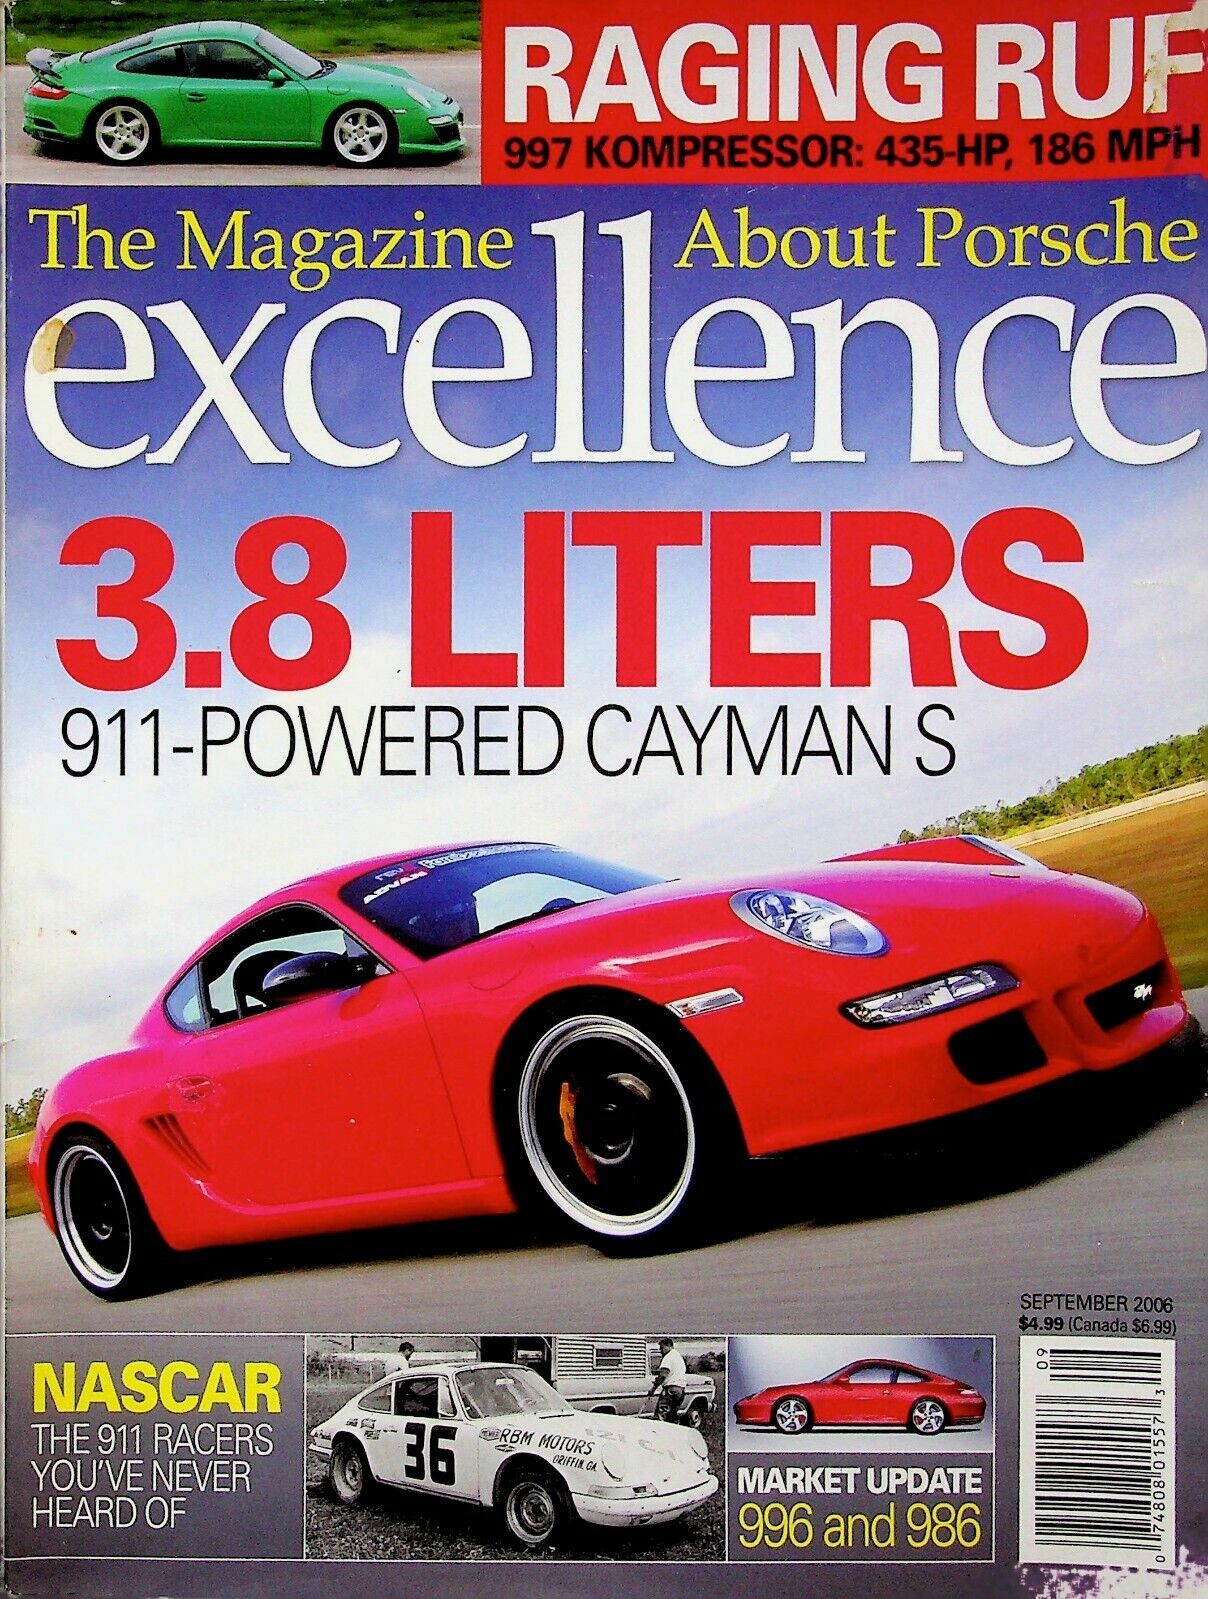 3.8 LITERS 911-POWERED CAYMAN S - EXCELLENCE THE MAGAZINE ABOUT PORSCHE, 2006